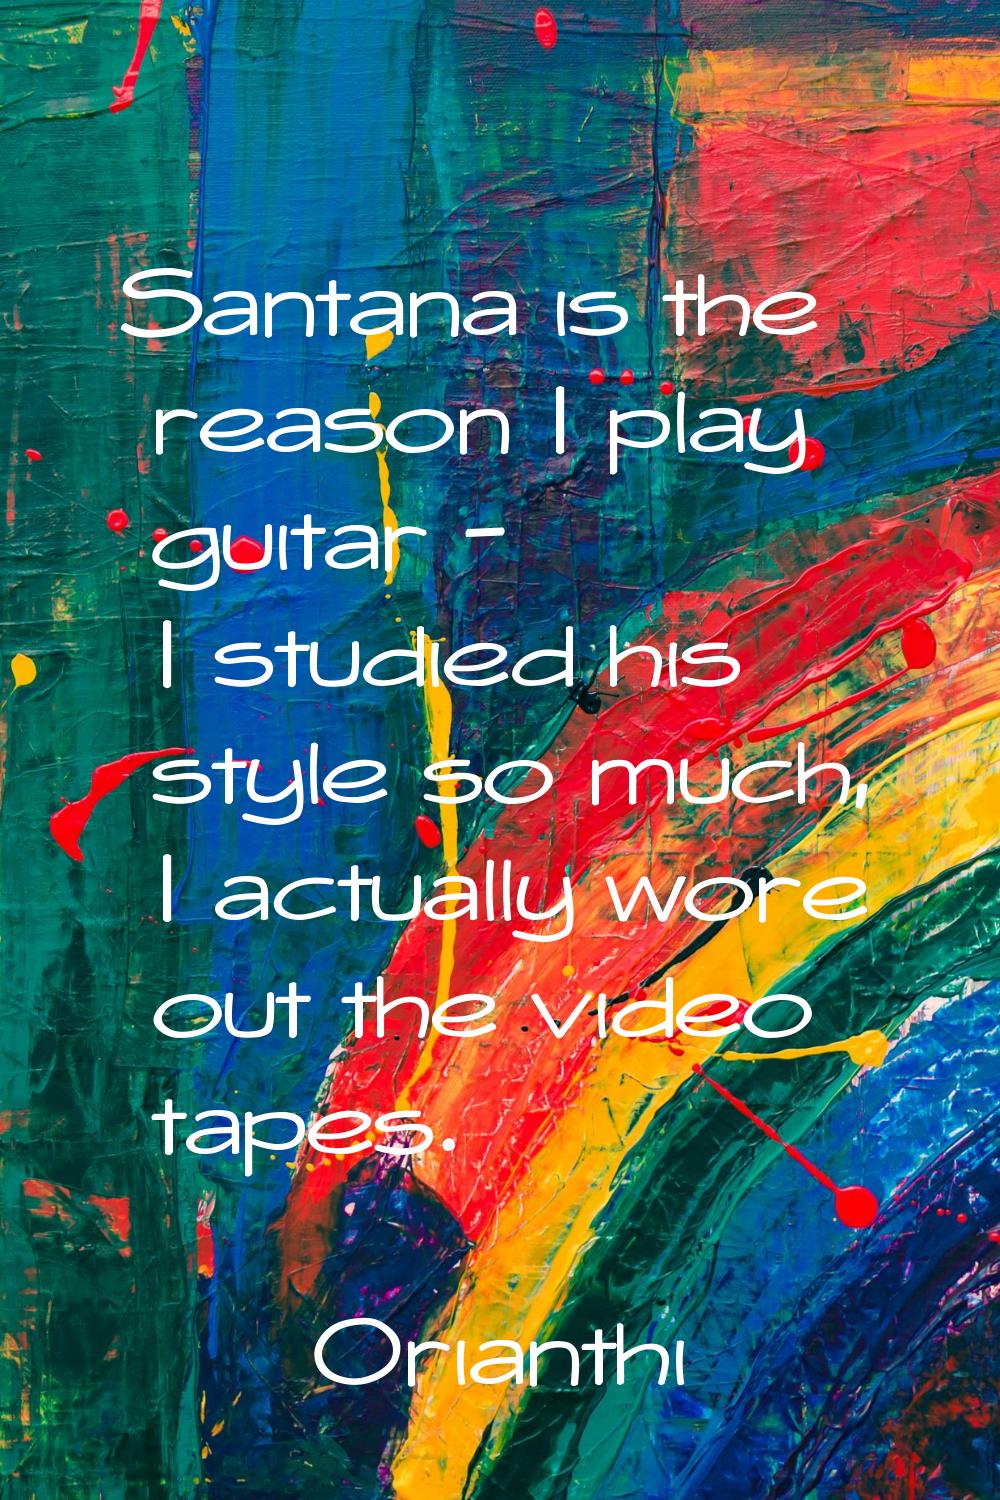 Santana is the reason I play guitar - I studied his style so much, I actually wore out the video ta